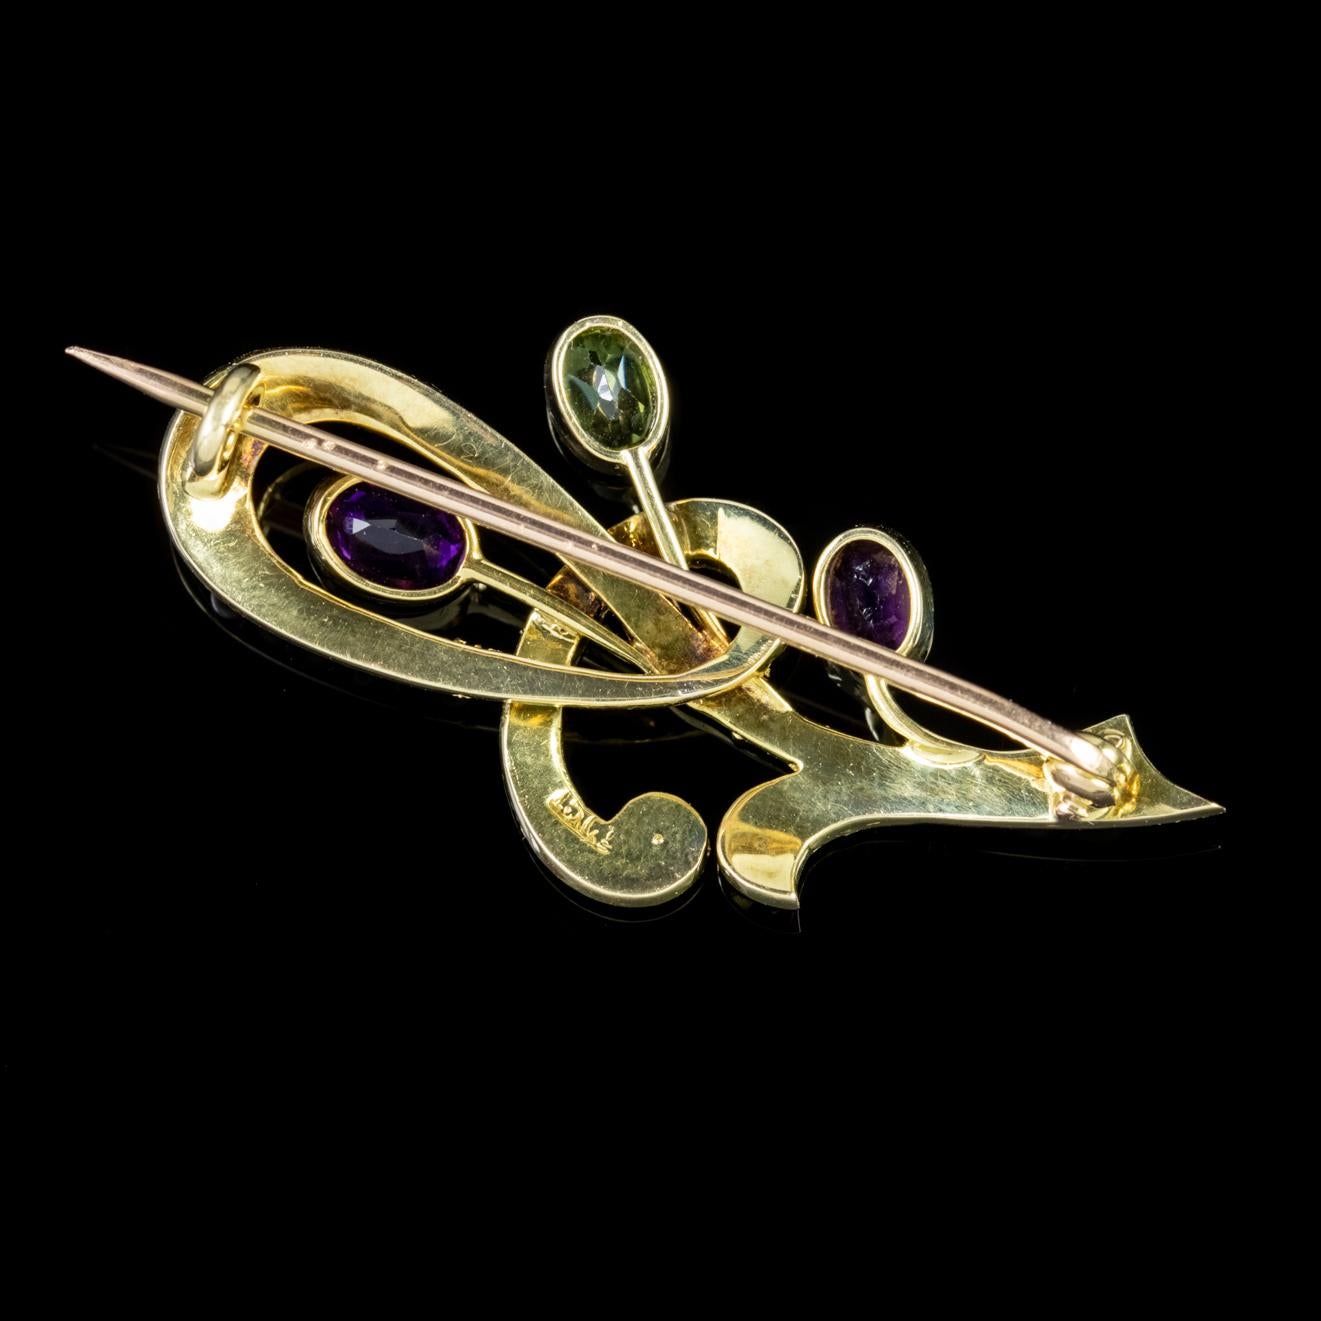 This stunning Edwardian brooch is crafted around two beautiful Amethysts, a single bright Peridot and an array of Pearls.

Fashioned in 15ct Yellow Gold, with 0.08ct Peridots and Amethysts, this brooch is a beautiful example of the jewellery made